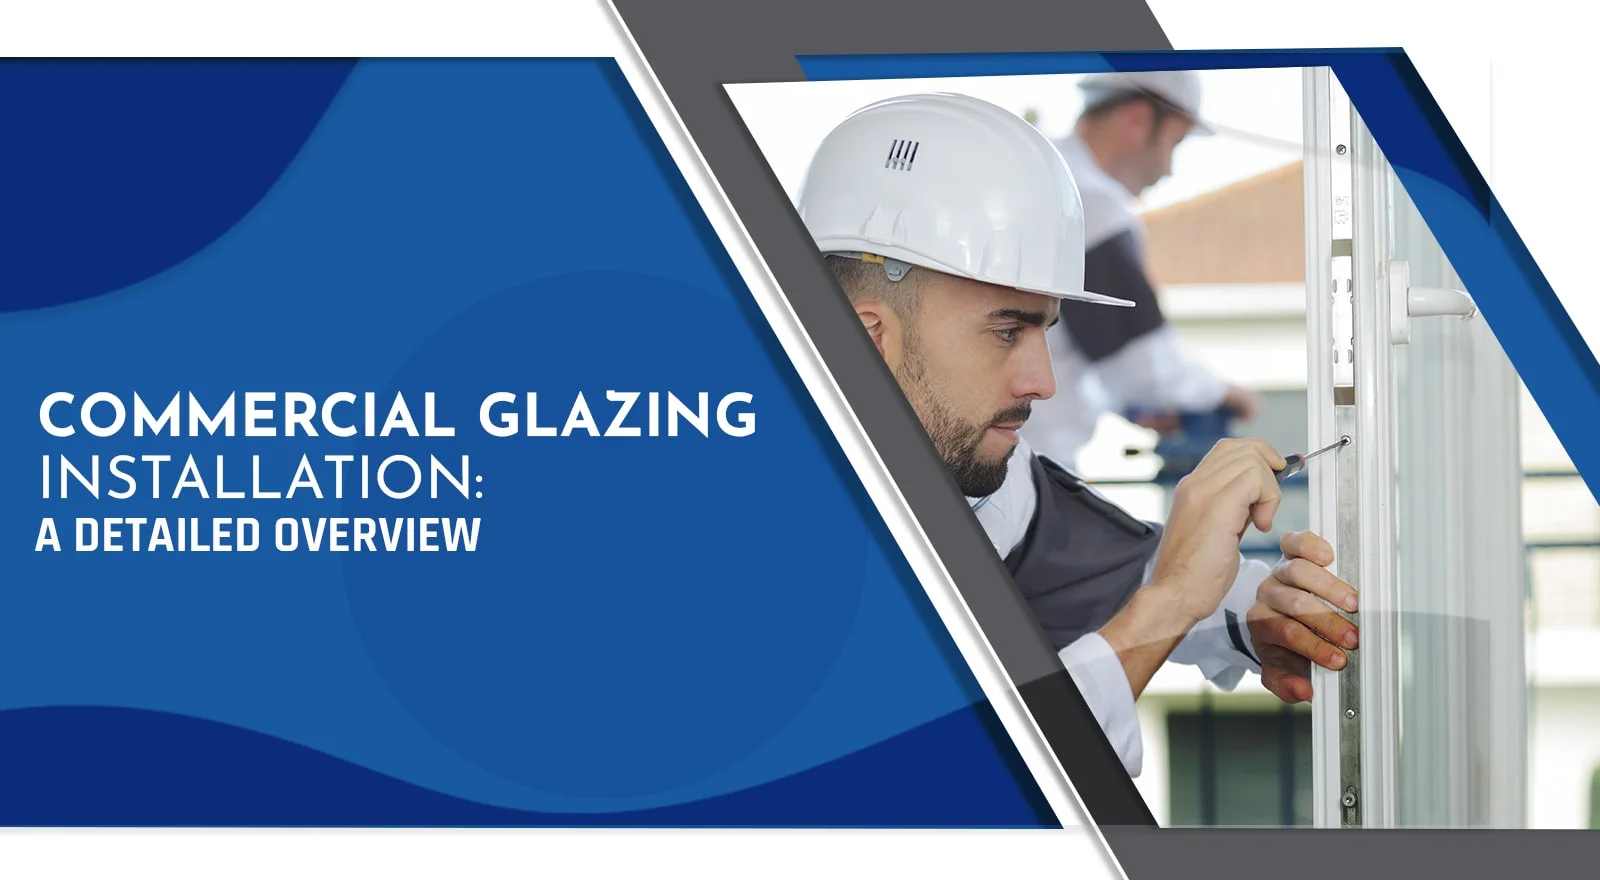 Guide to Commercial Glazing Installation